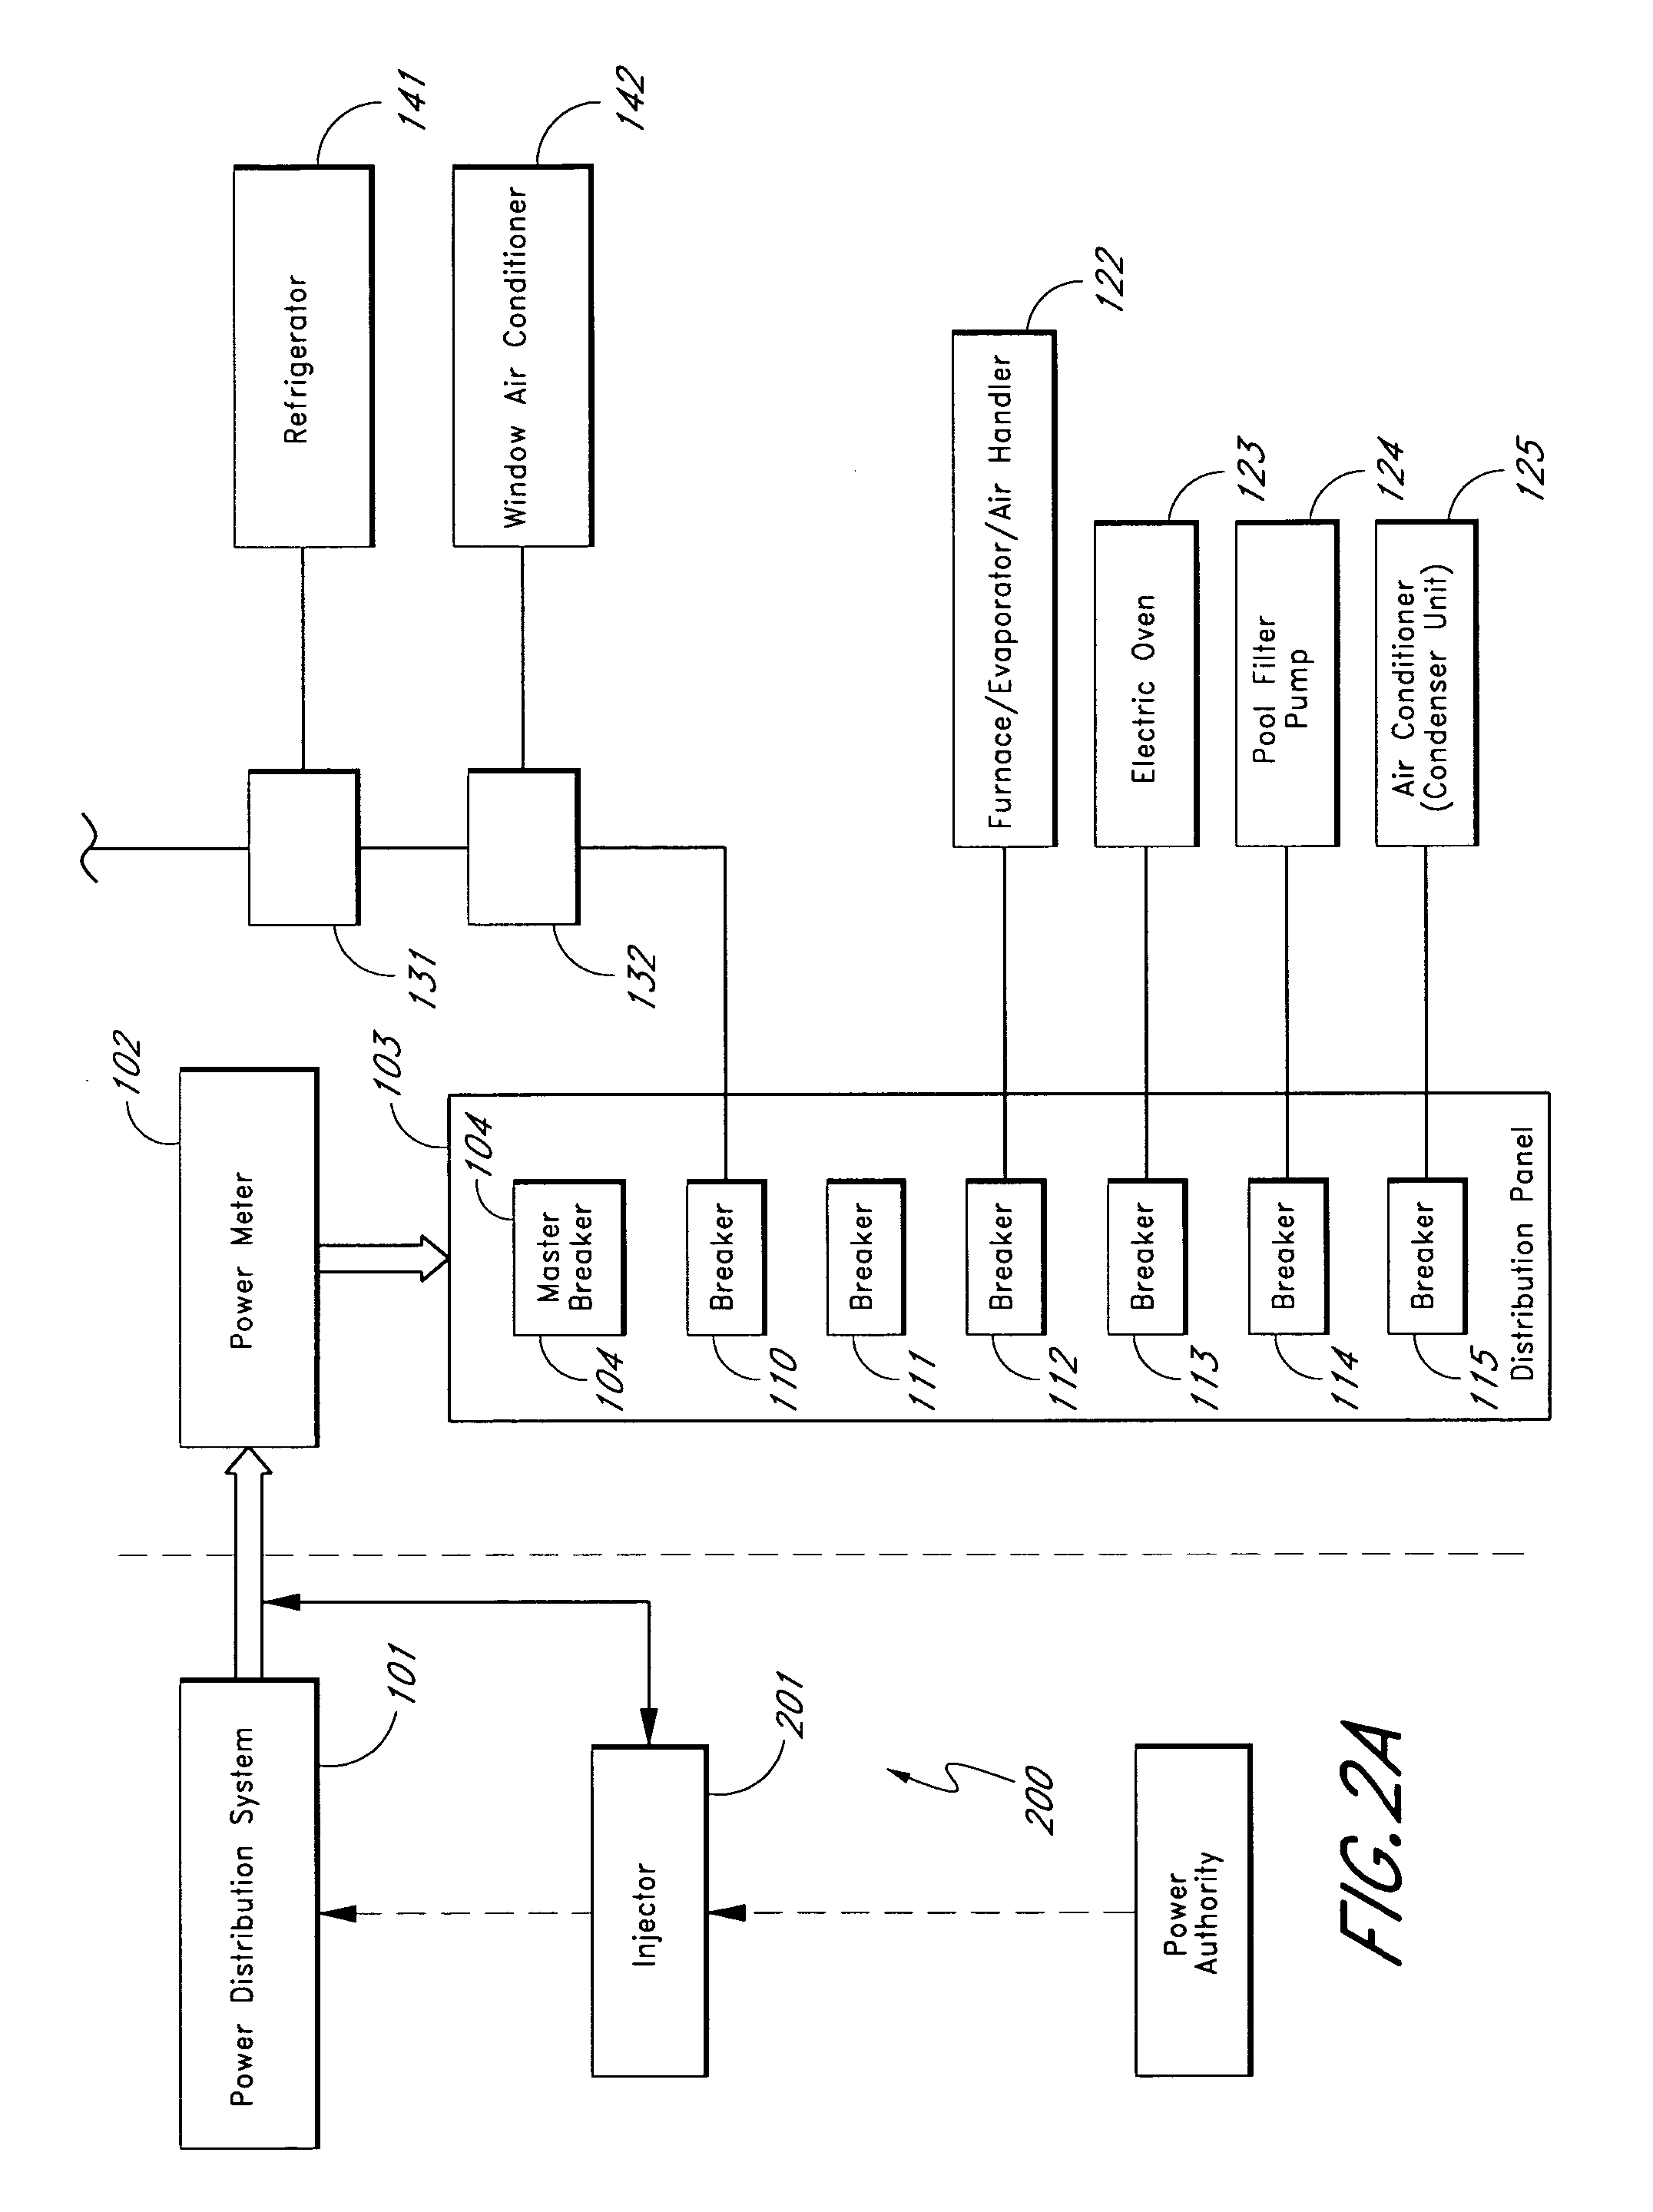 Method and apparatus for load management in an electric power system